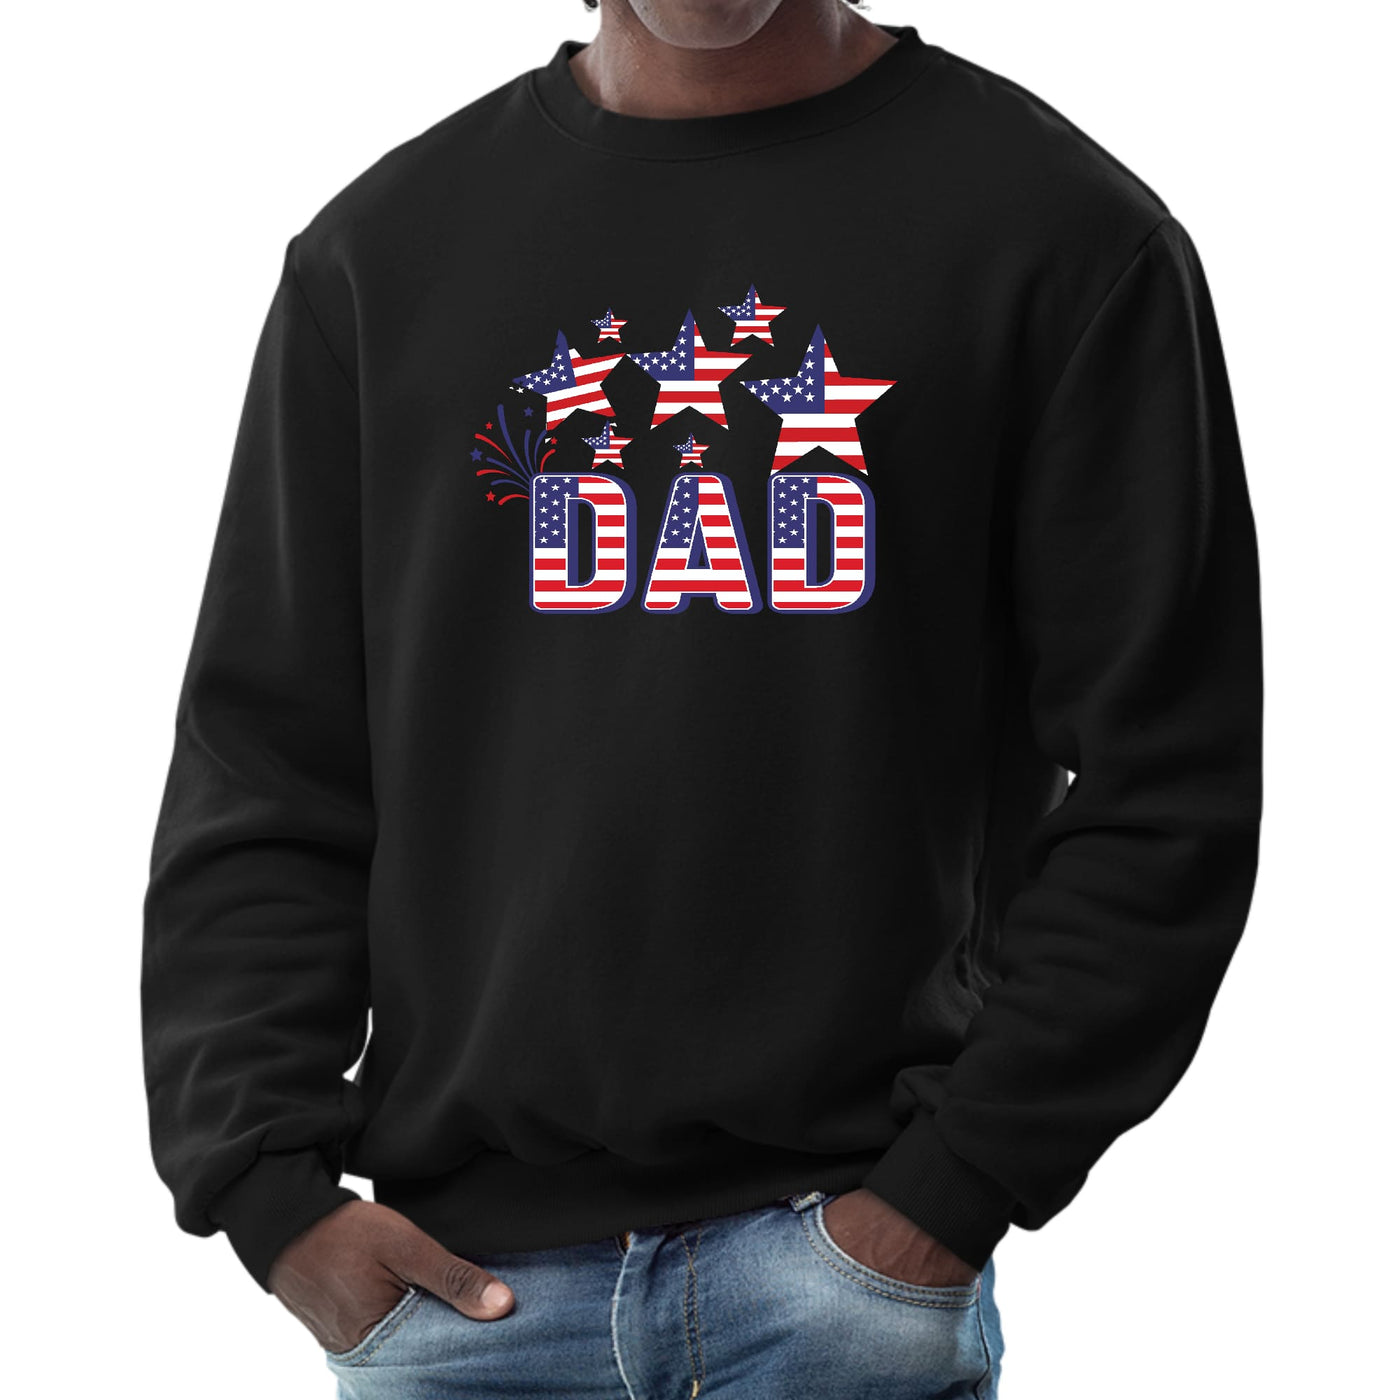 Mens Graphic Sweatshirt Dad Independence Day 4th Of July Celebration - Mens